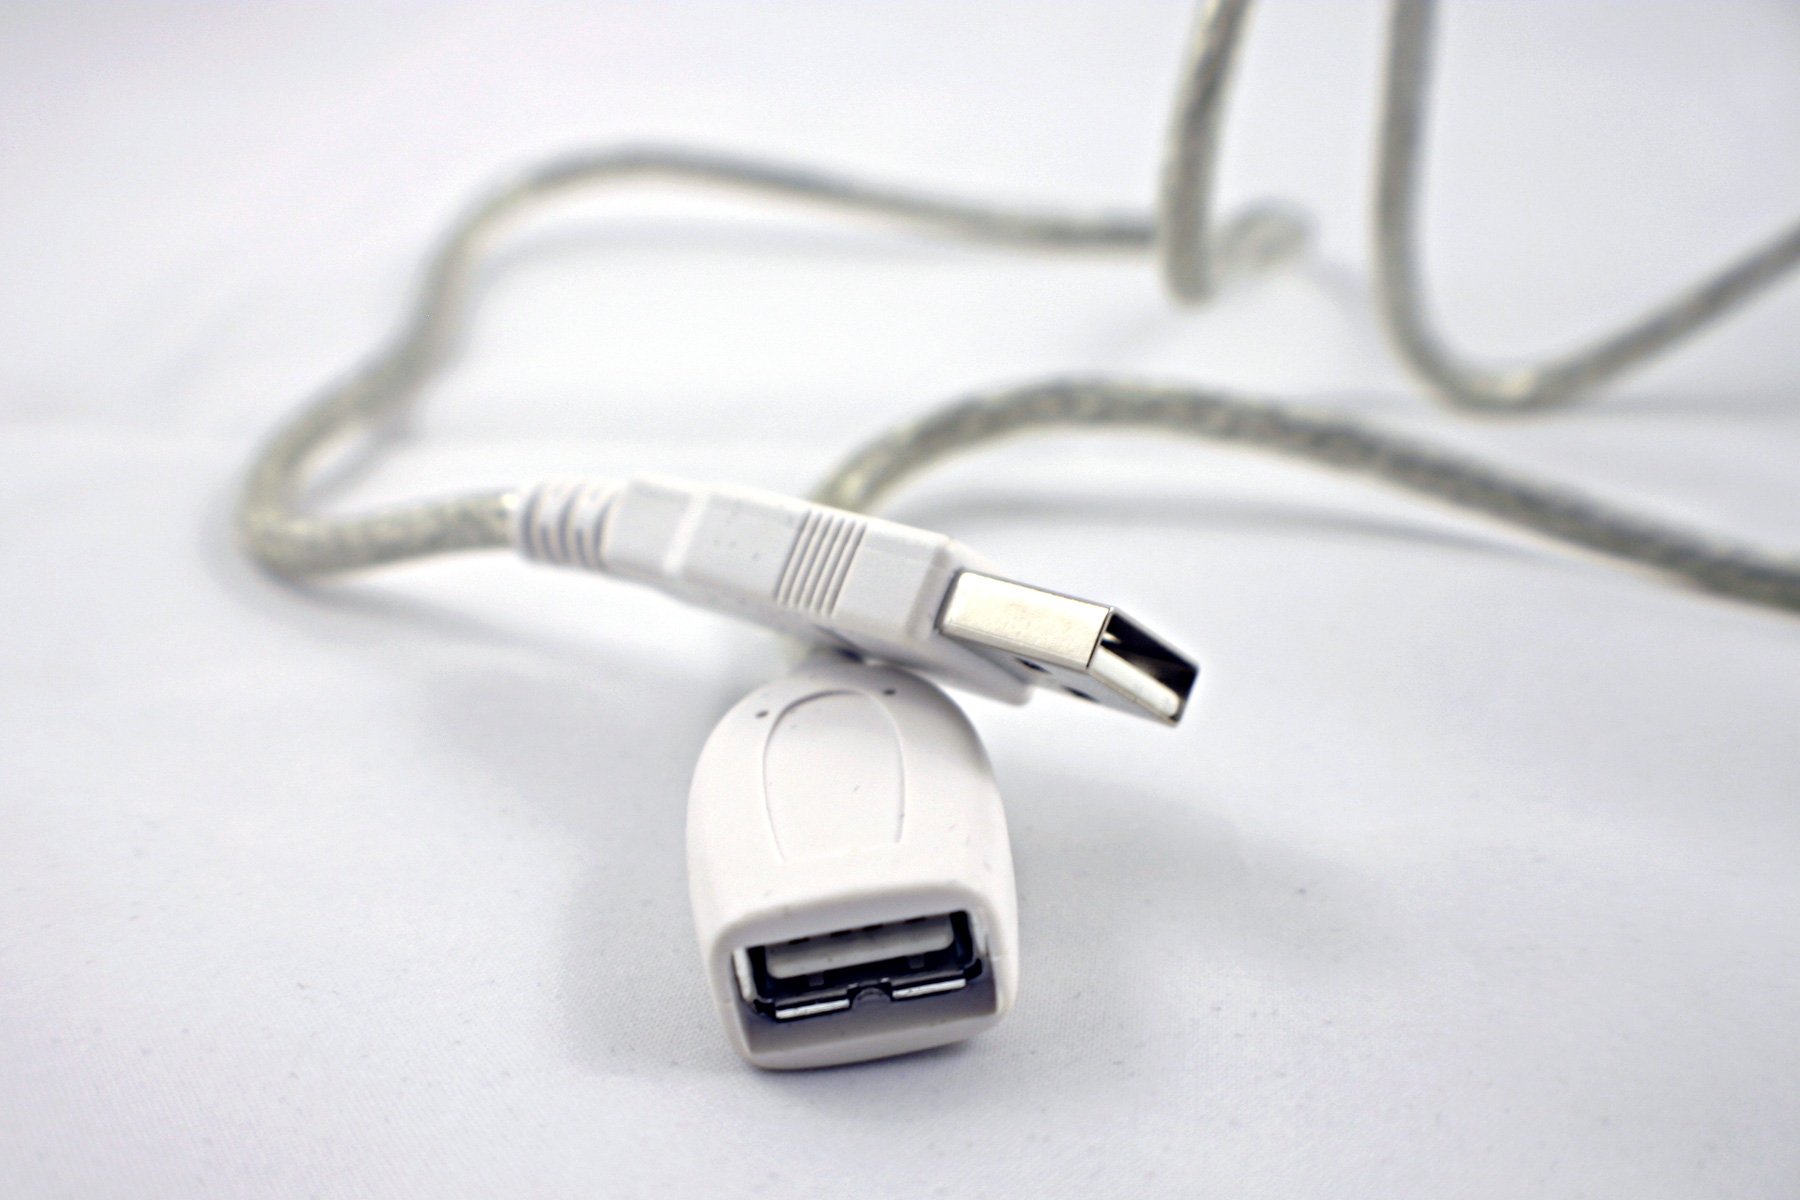 Usb extension cable photo